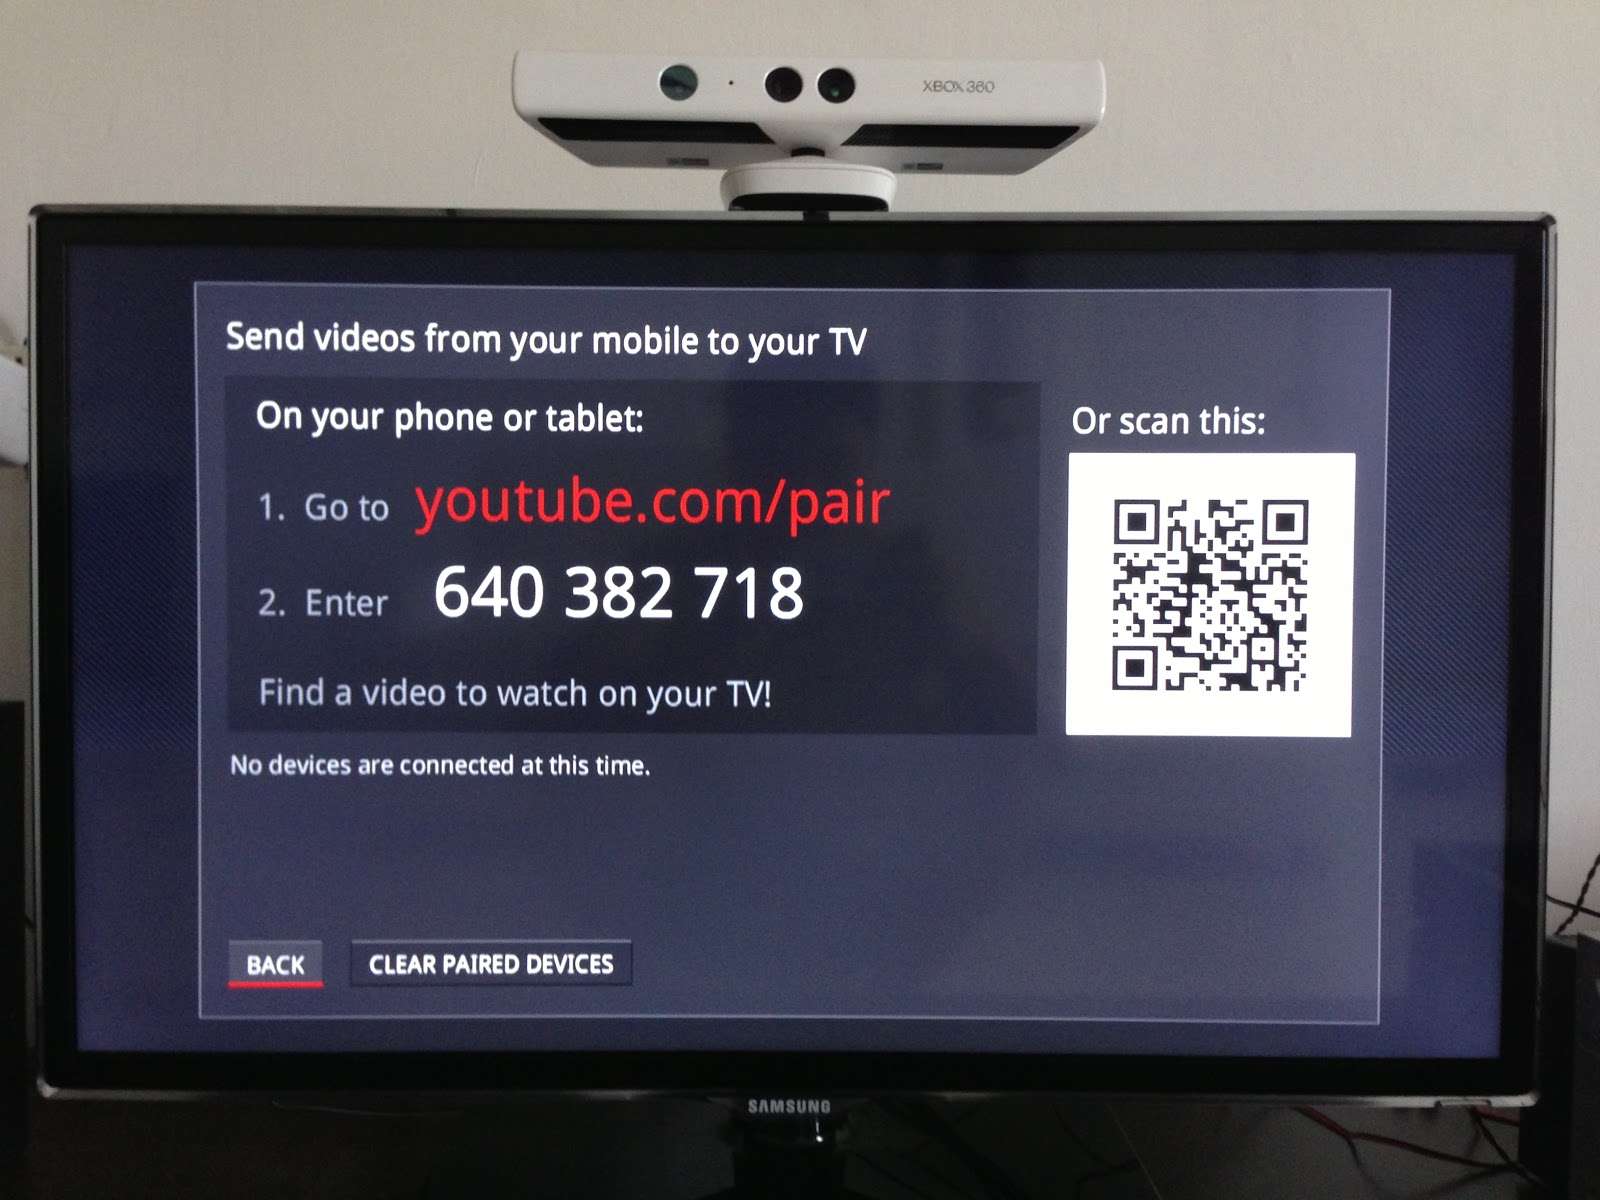 BIG LIFE SPENDER: PAIRING AN IPHONE TO A SMART TV WHEN USING YOUTUBE